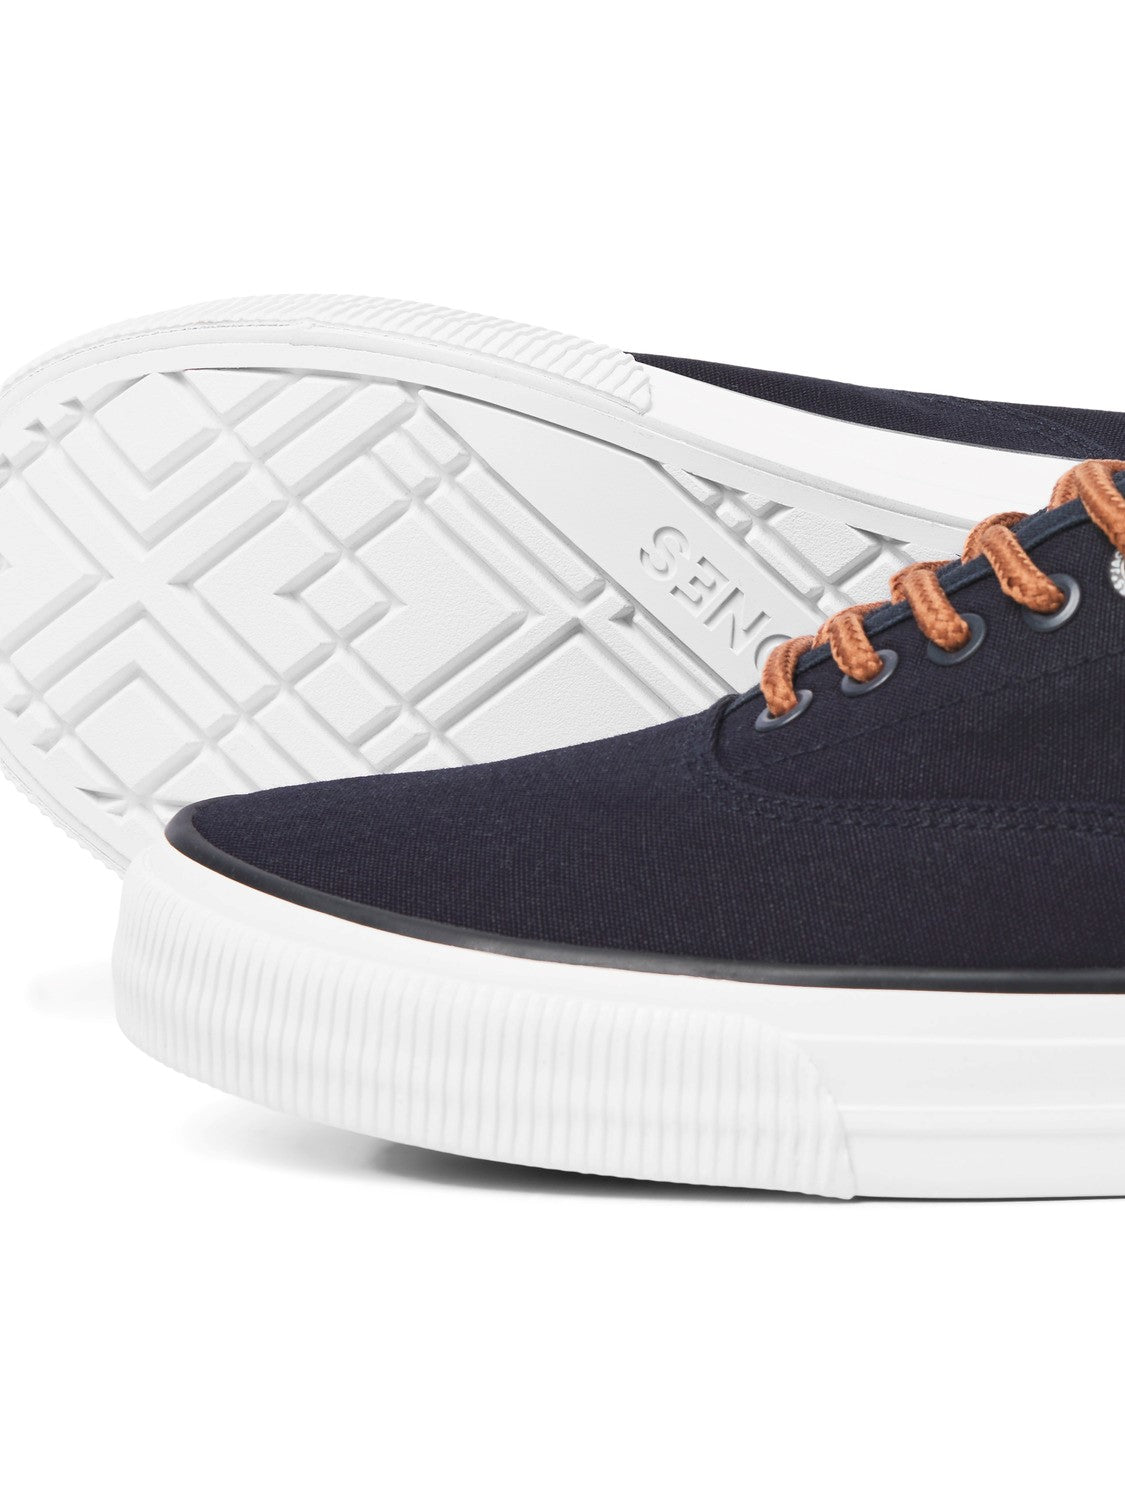 Men's Curtis Casual Canvas Navy Trainer-Sole View